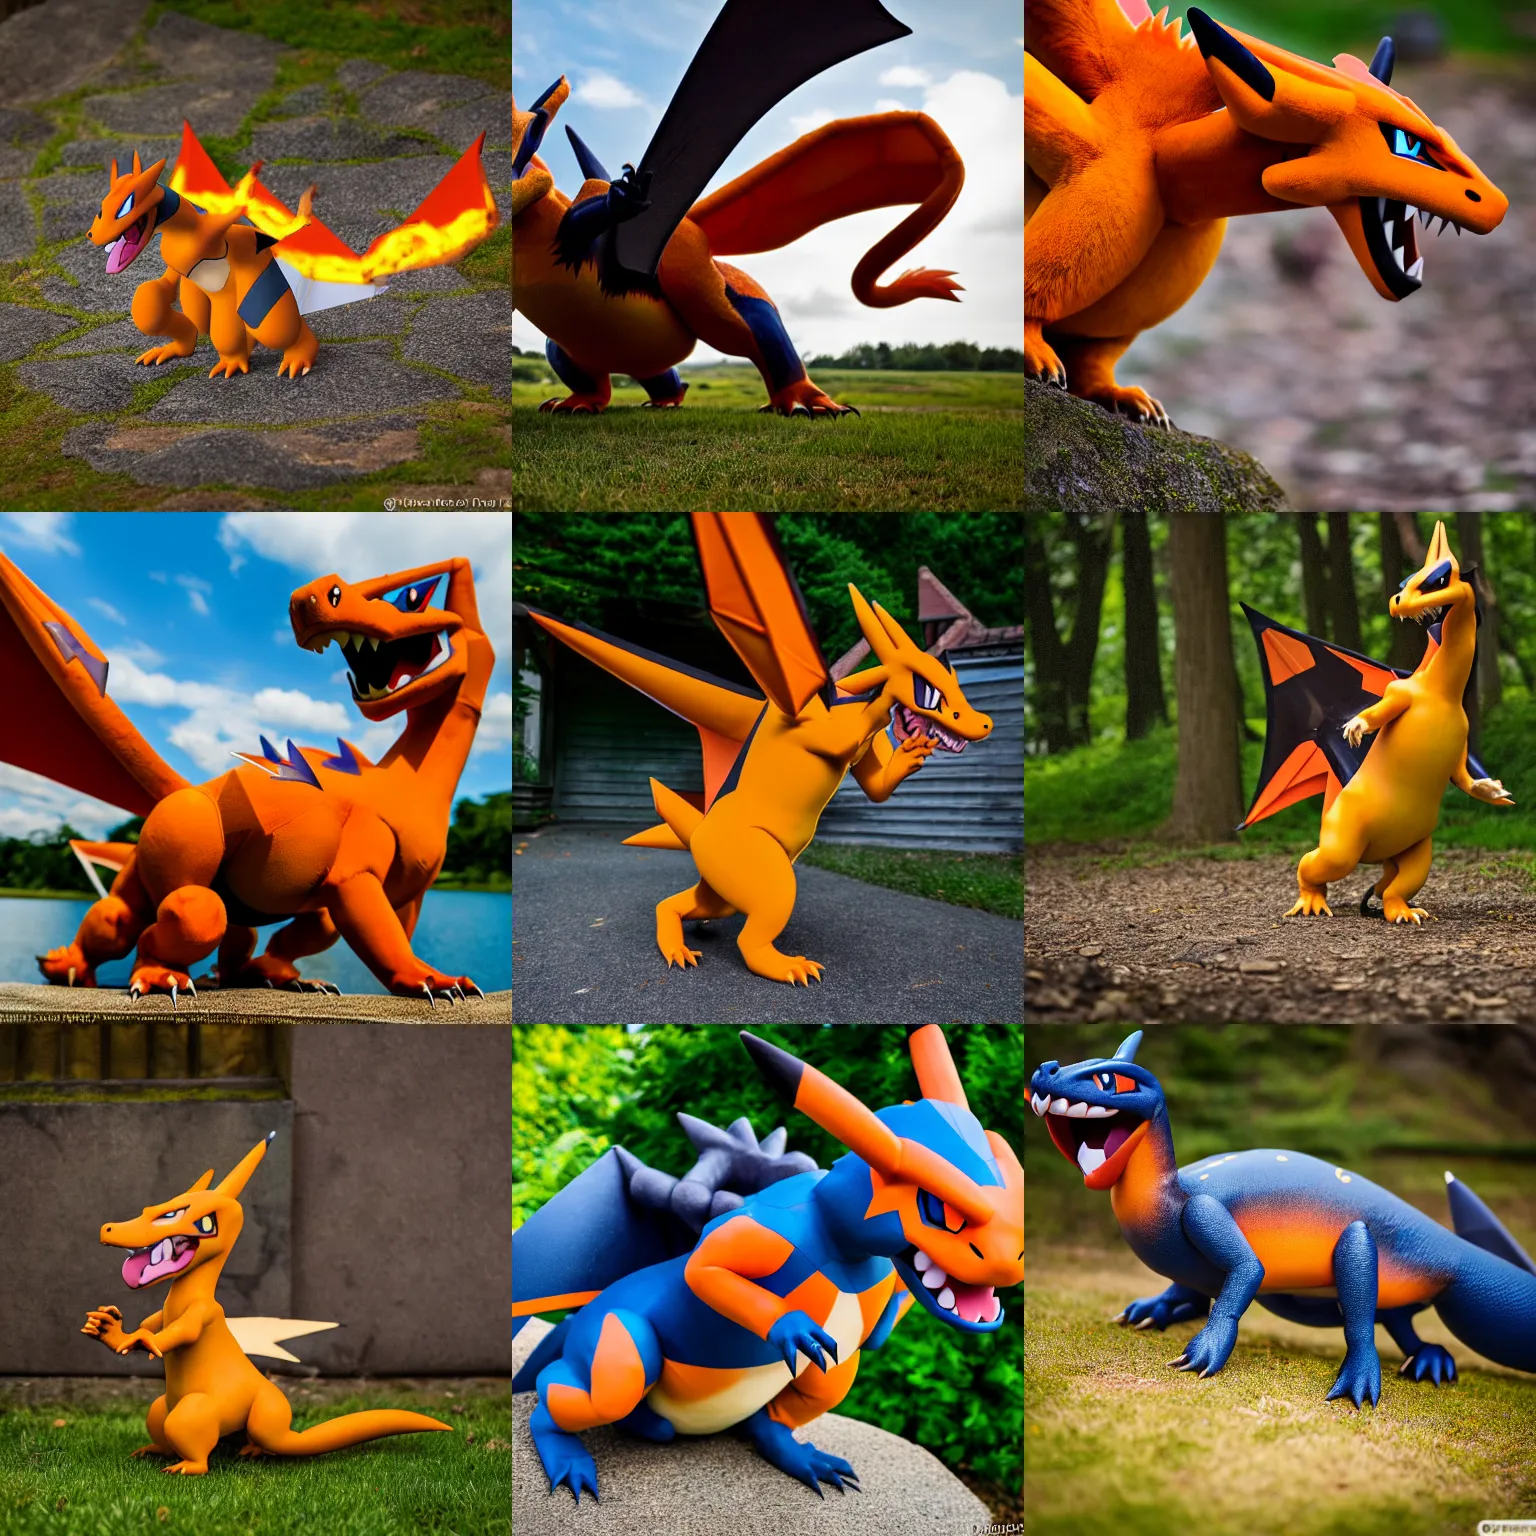 Prompt: The pokemon charizard as a real life animal, nature photography, outdoors, XF IQ4, f/1.4, ISO 200, 1/160s, 8K, RAW, unedited